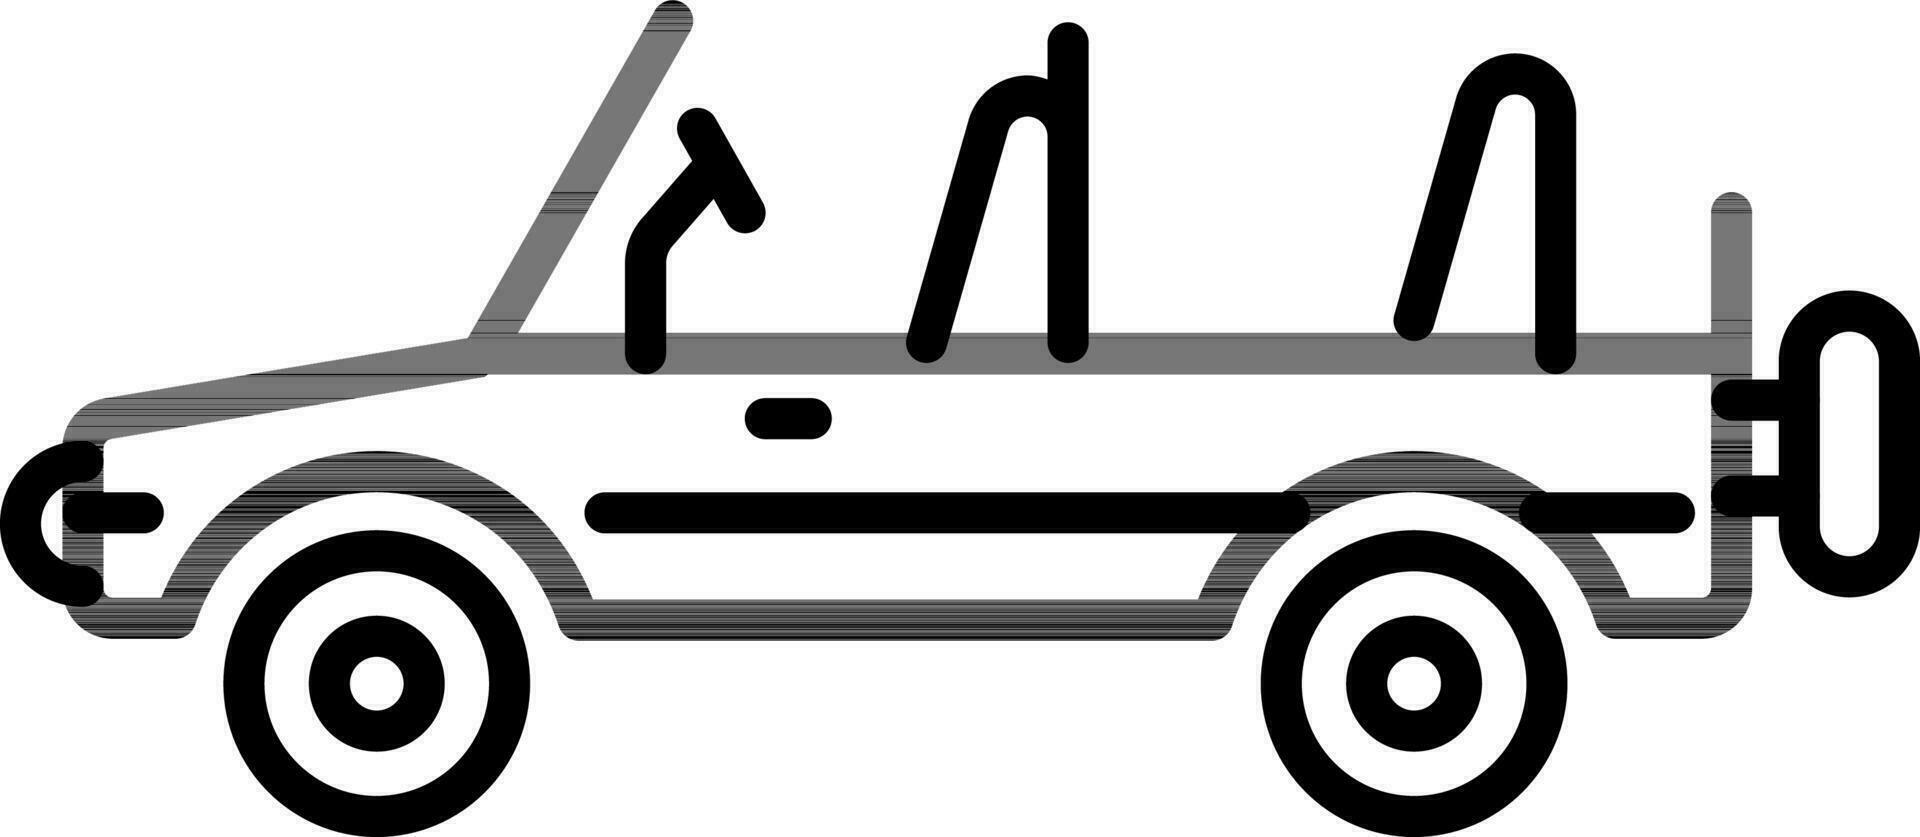 Black Line Art Jeep Icon in Flat Style. vector